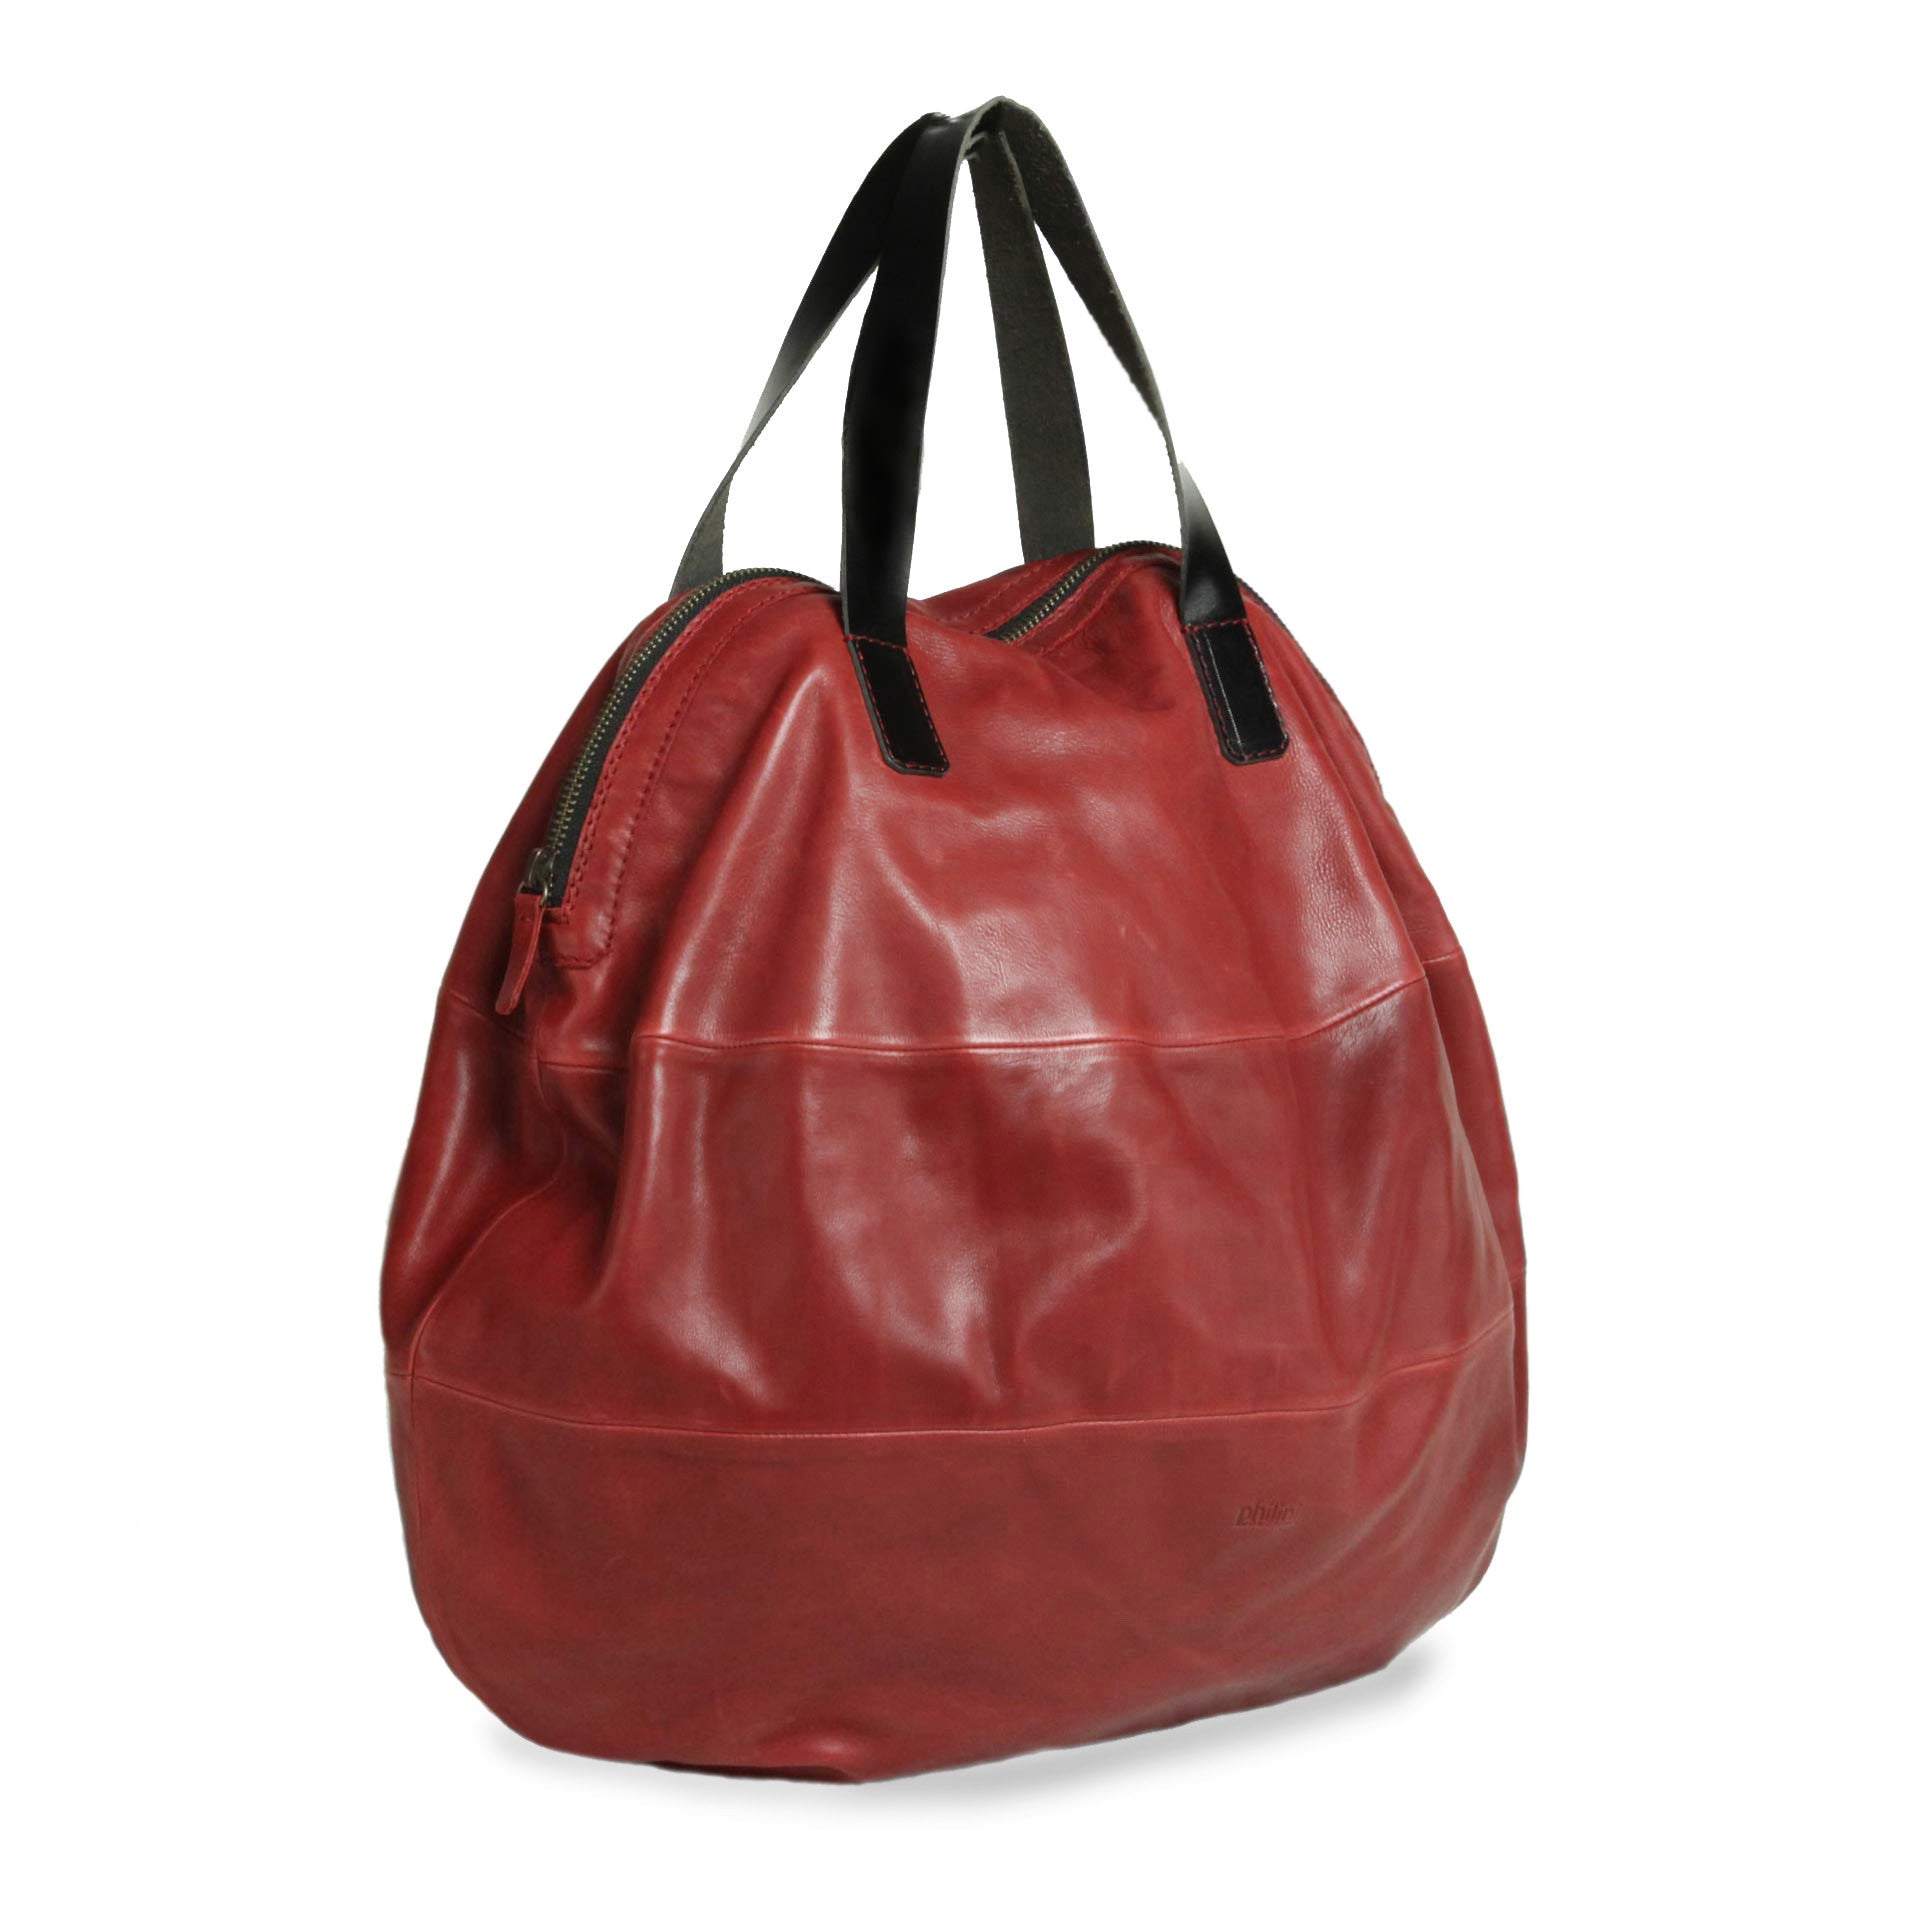 Philini Handbags Nataly from red aniline leather